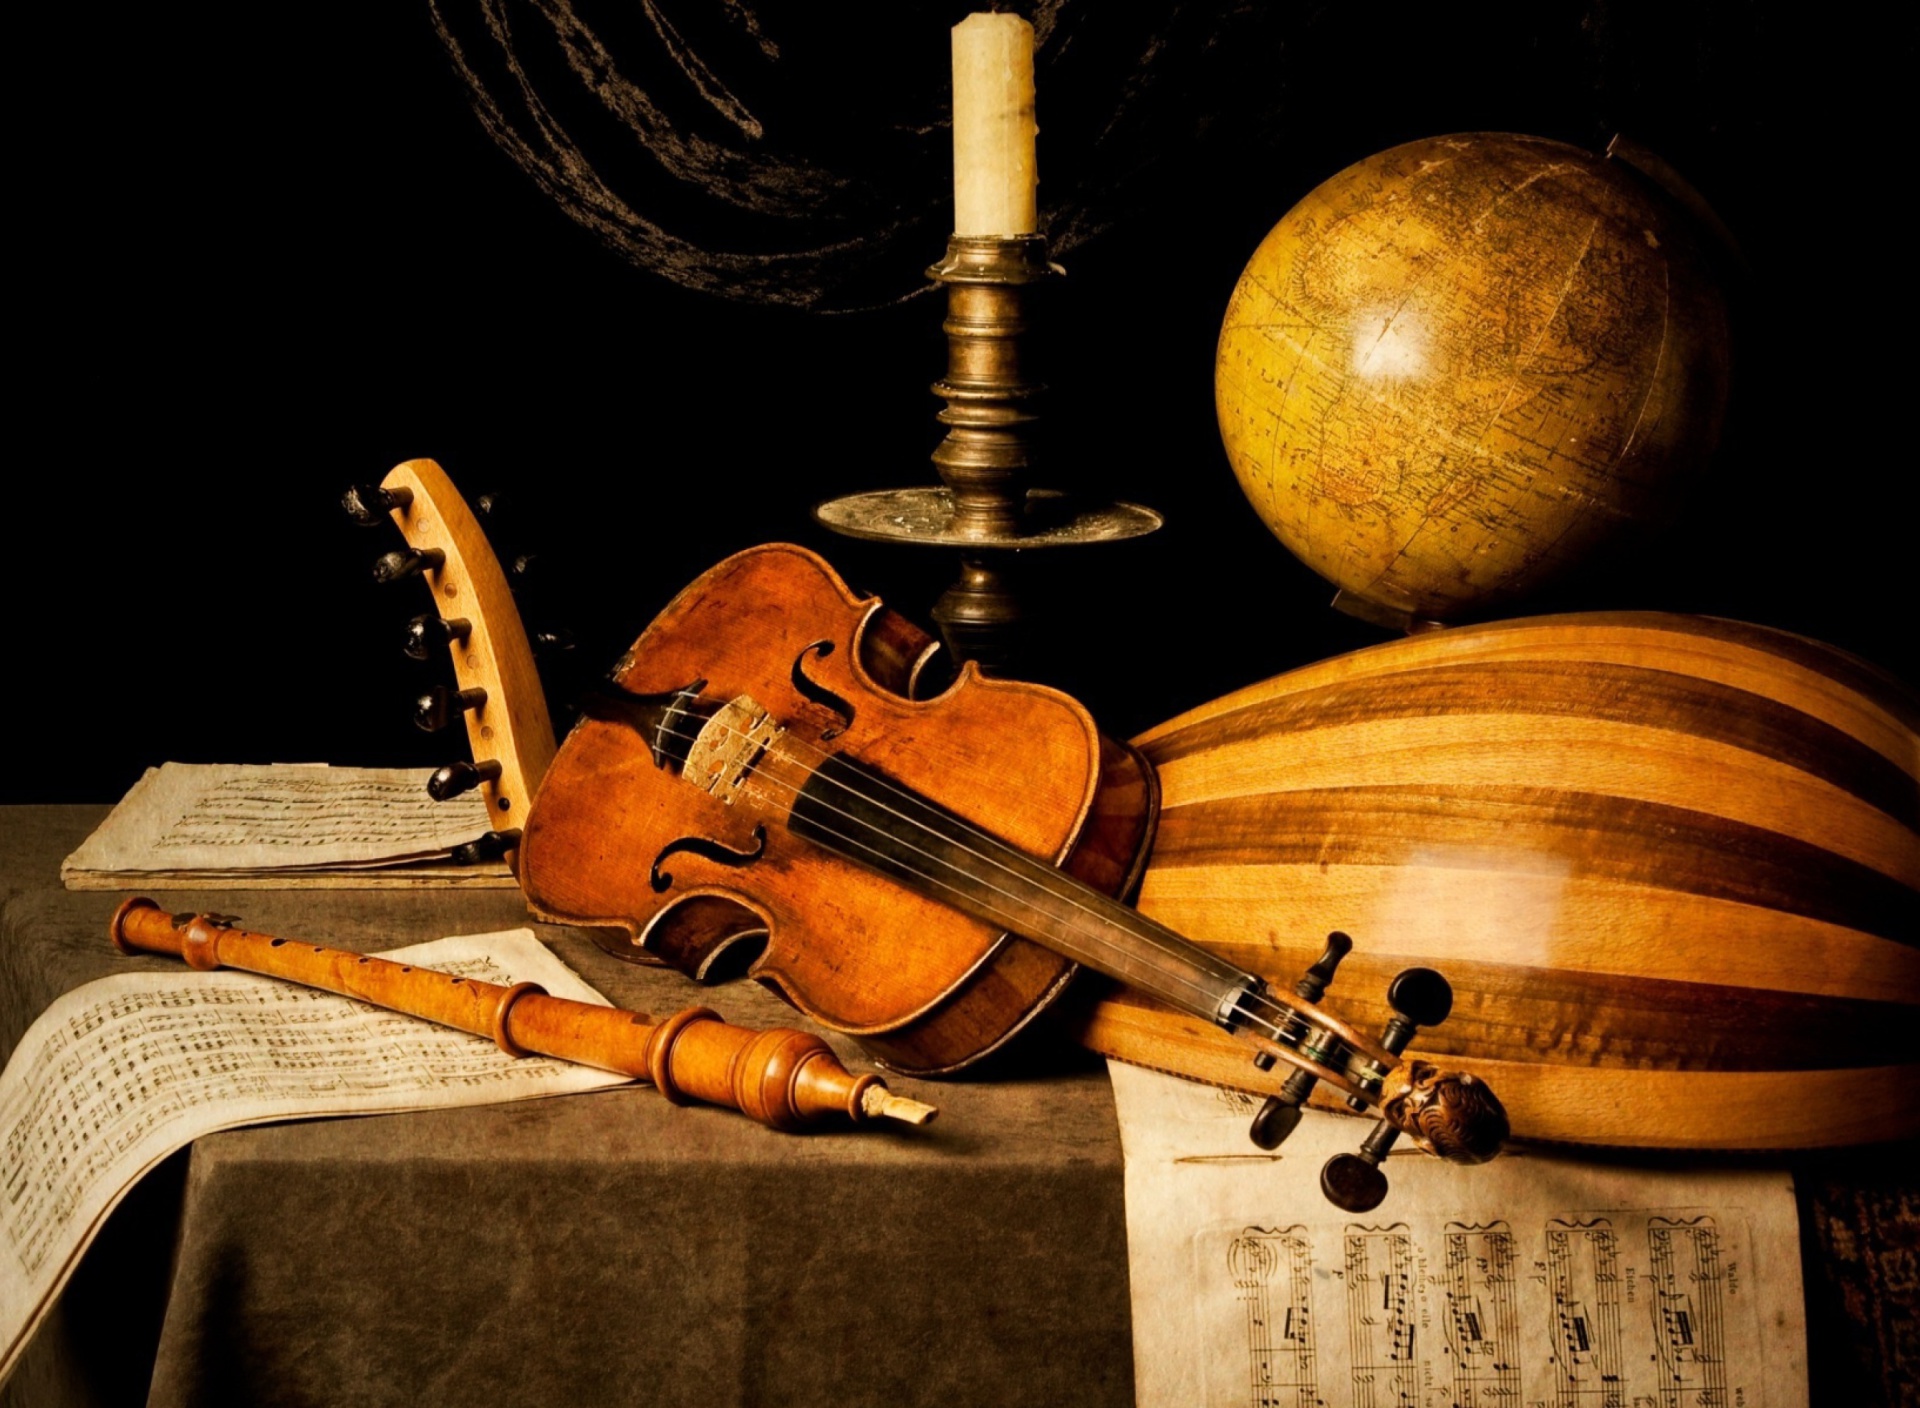 Still life with violin and flute screenshot #1 1920x1408